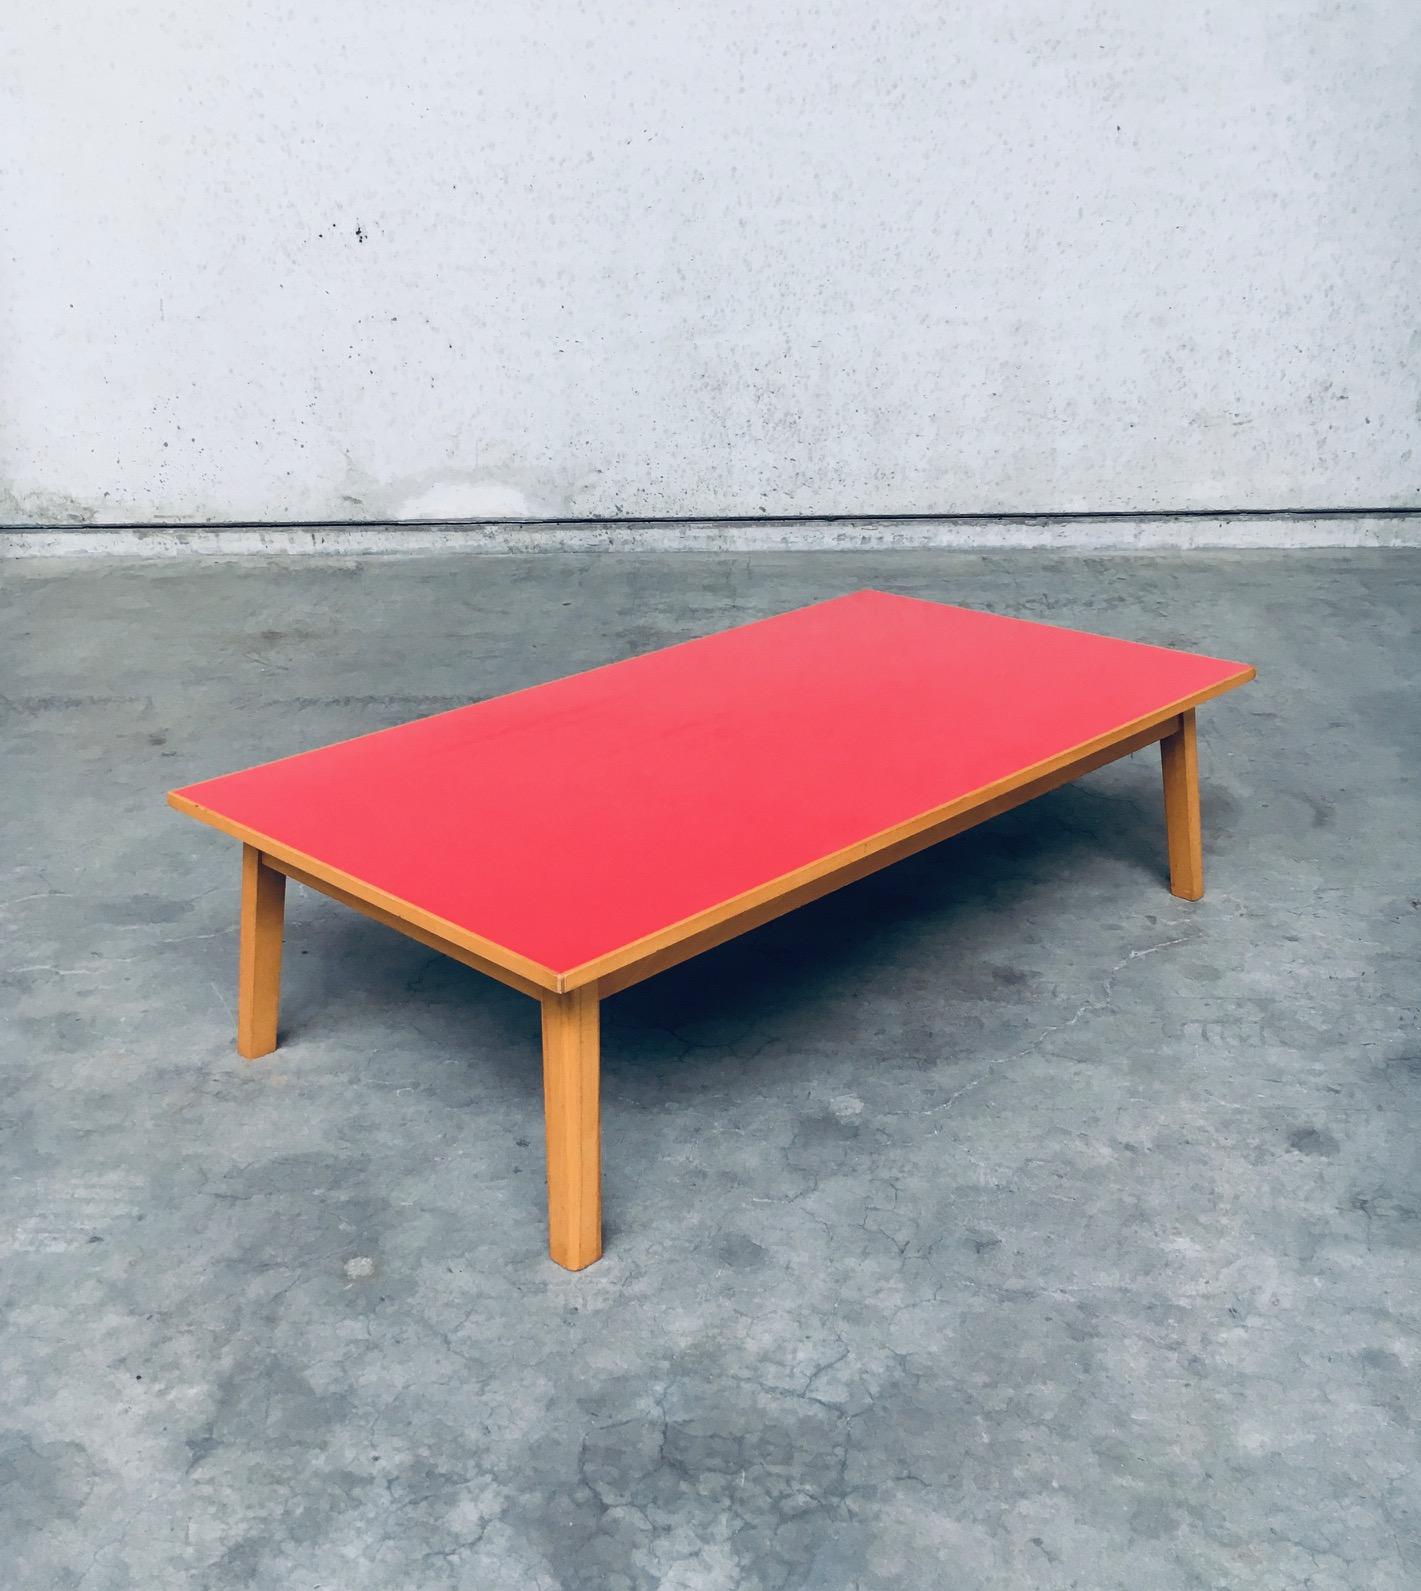 Vintage Midcentury Modern Belgian Design Red Formica / Laminate Coffee Table. Made in Belgium, 1950's / 60's period. This was once a kitchen table and has been cut down to a coffee table height. This is a certain eyecatcher and comes in very good